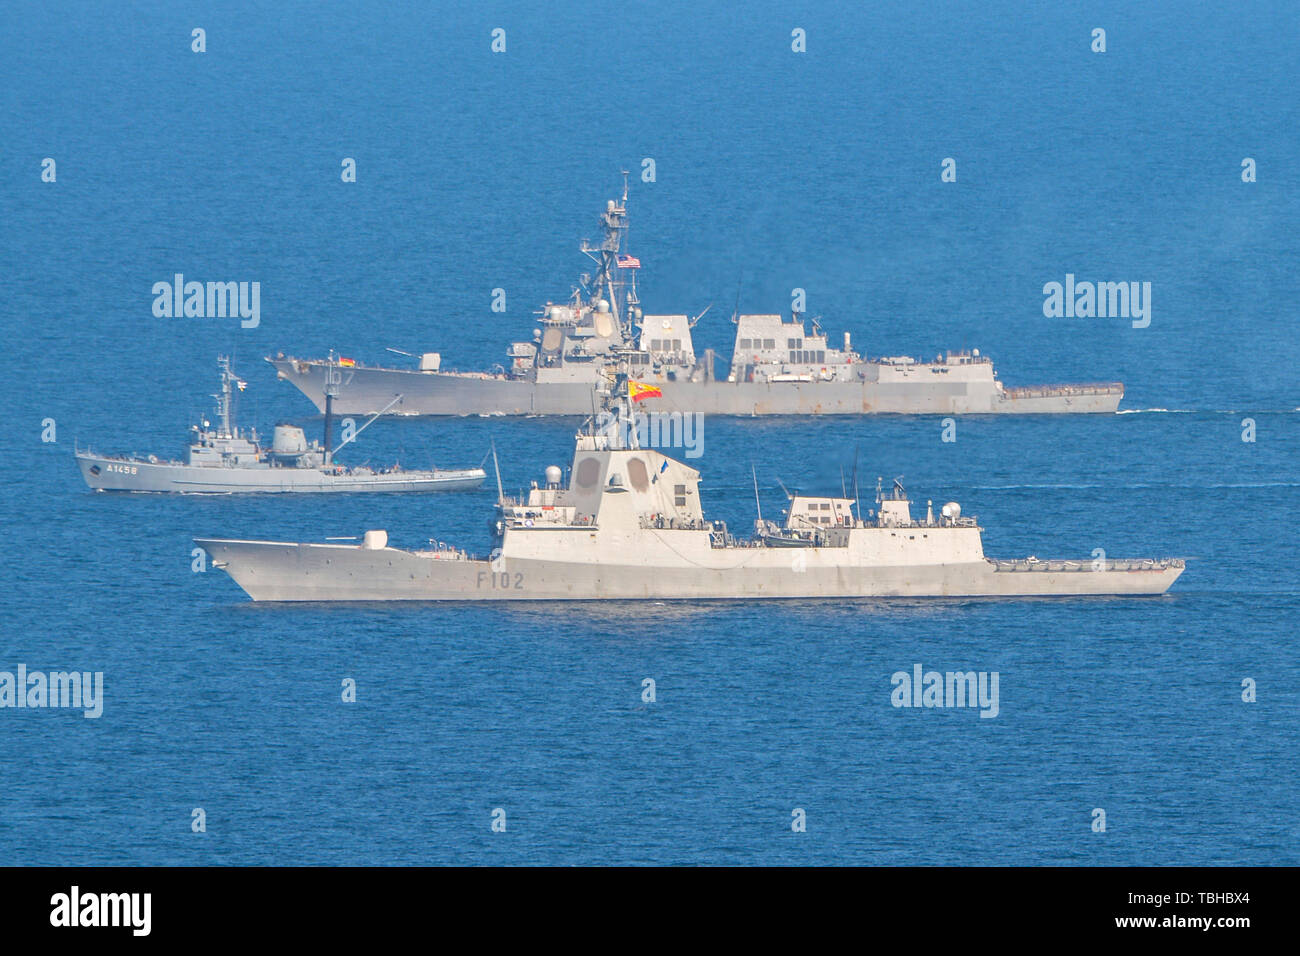 190530-N-JX484-341  BALTIC SEA (May 30, 2019) The guided-missile destroyer USS Gravely (DDG 107) participates in a photo exercise with the German navy while transiting the Baltic Sea. Gravely is underway on a regularly-scheduled deployment as the flagship of Standing NATO Maritime Group 1 to conduct maritime operations and provide a continuous maritime capability for NATO in the northern Atlantic. (U.S. Navy photo by Mass Communication Specialist 2nd Class Mark Andrew Hays/Released) Stock Photo